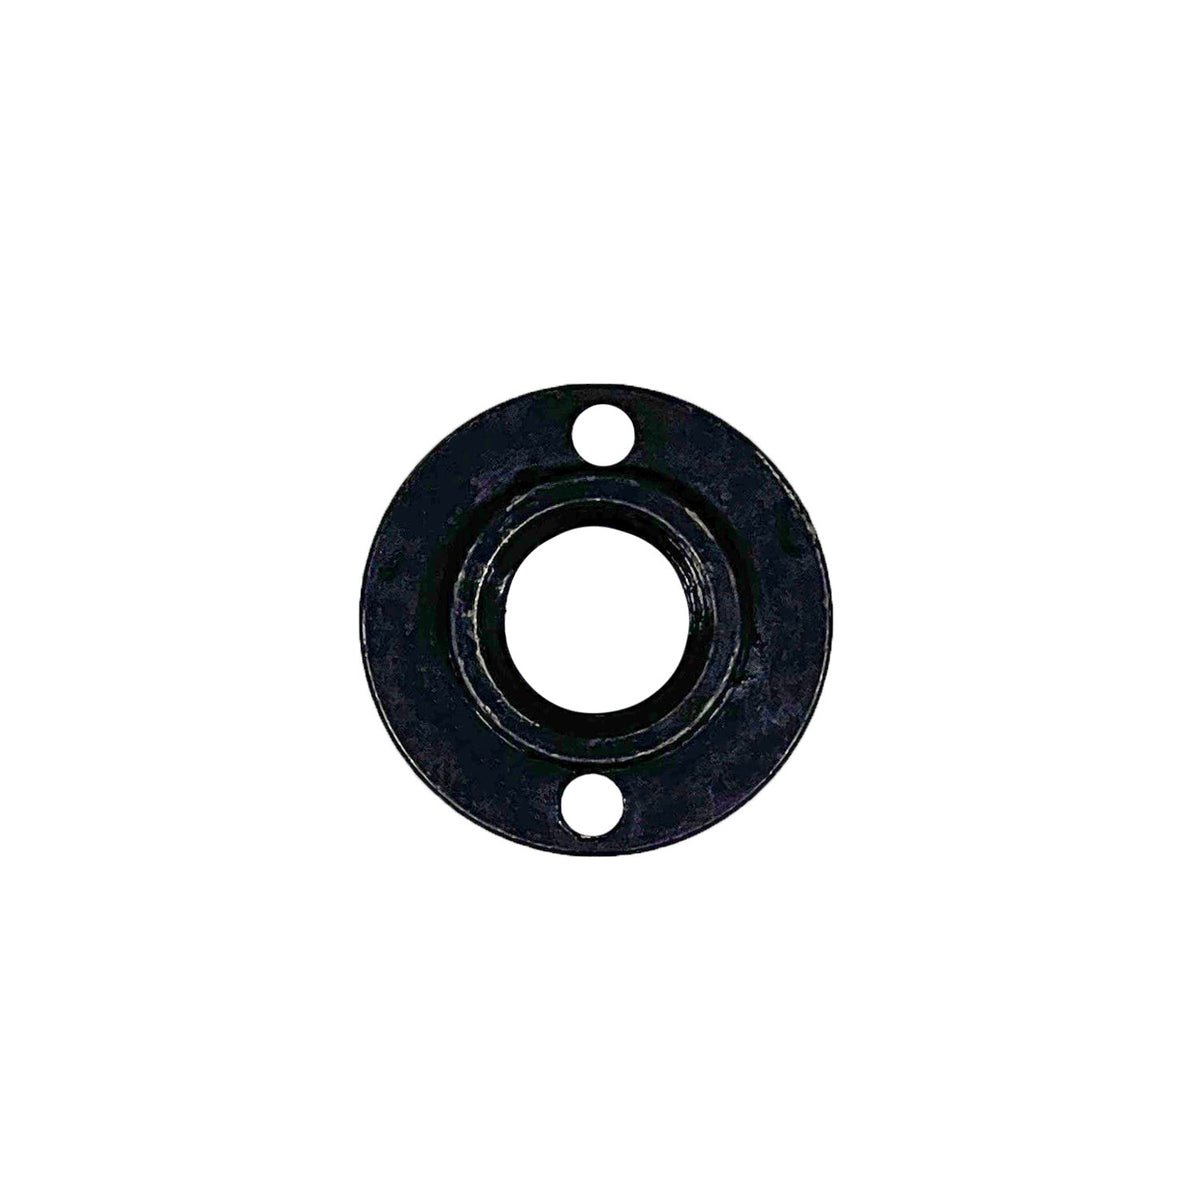 Single black 5/8 inch-11 Lock Nut for Angle Grinders, essential for secure fastening and smooth operation of your grinding tasks.